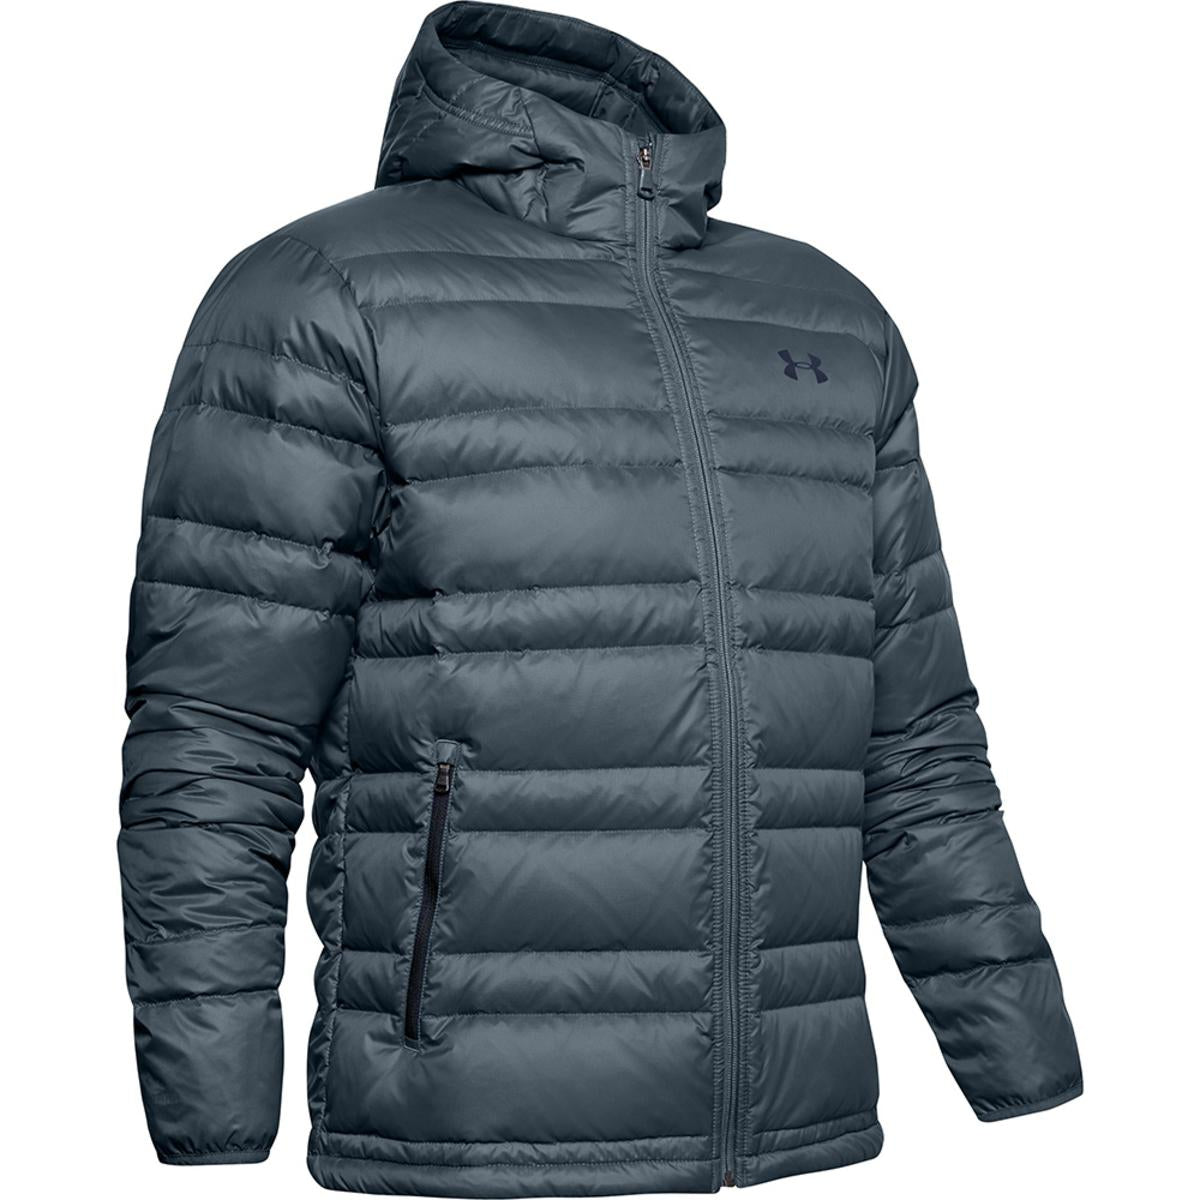 Under Armour Men's Armour Down Hooded Jacket